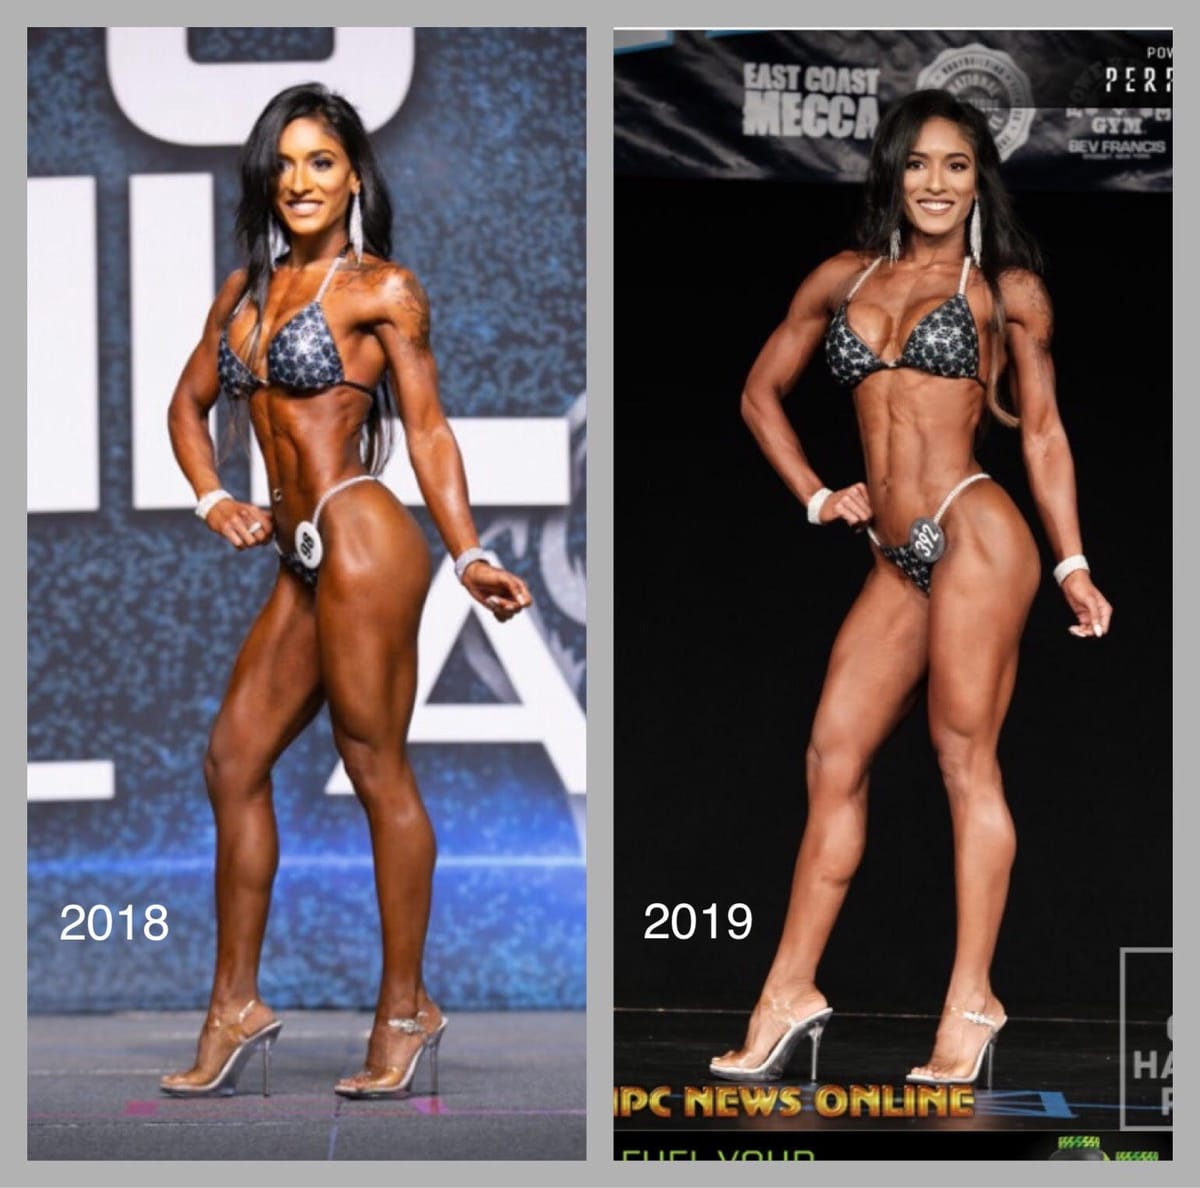 Fit Over 50 - My Jounrey to become a Masters Bikini Competitor